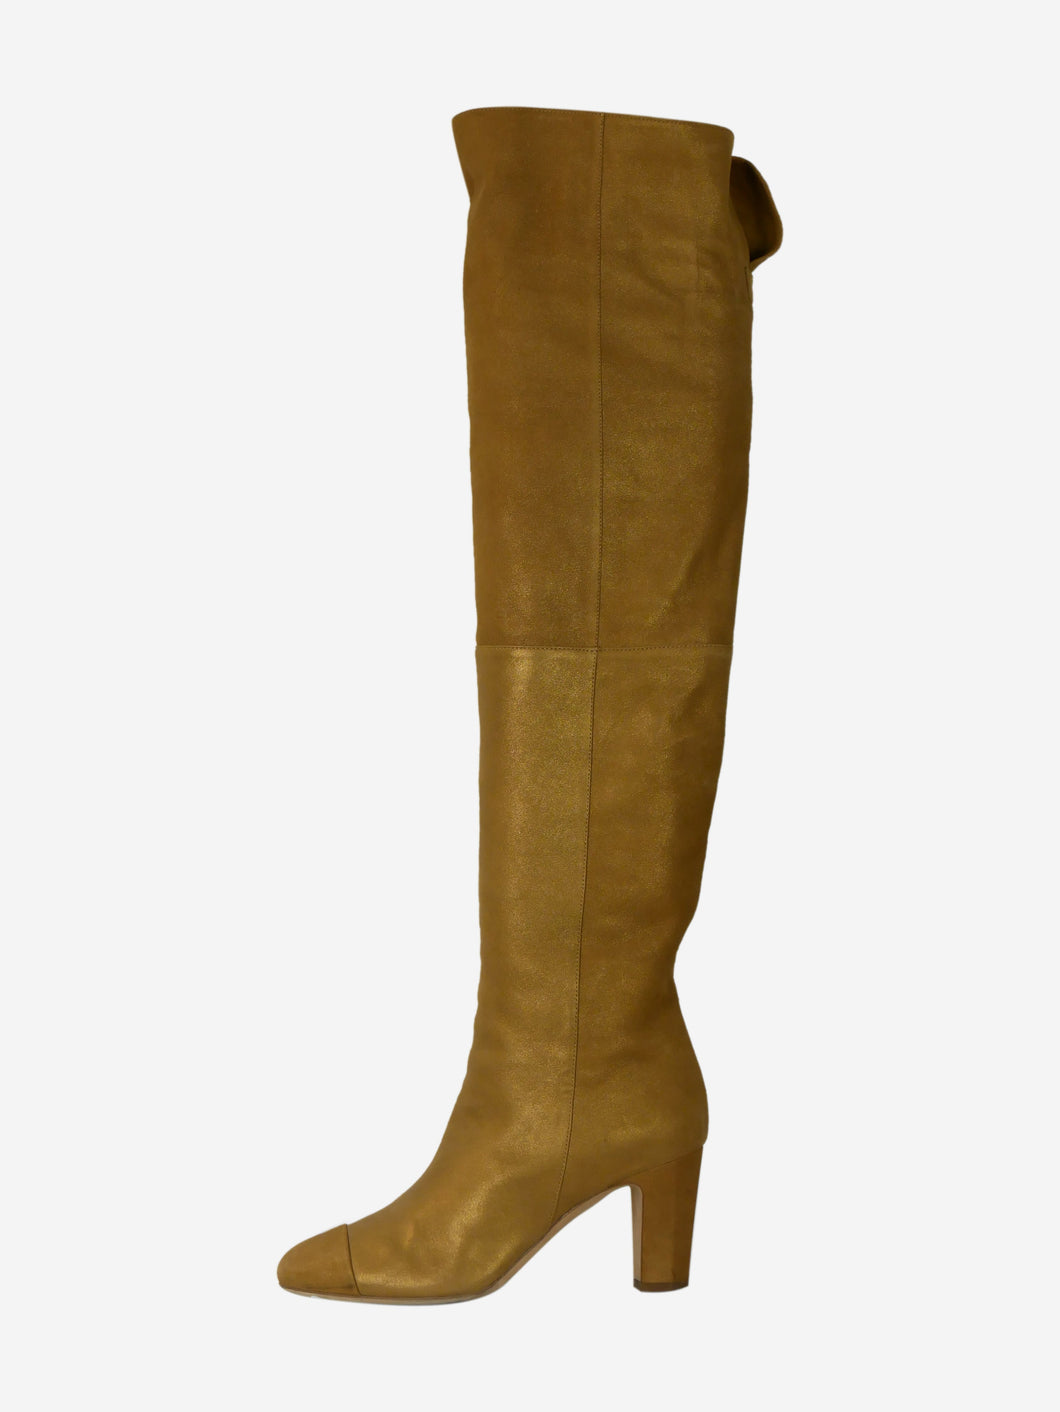 Gold suede knee-high boots - size EU 37 Boots Chanel 